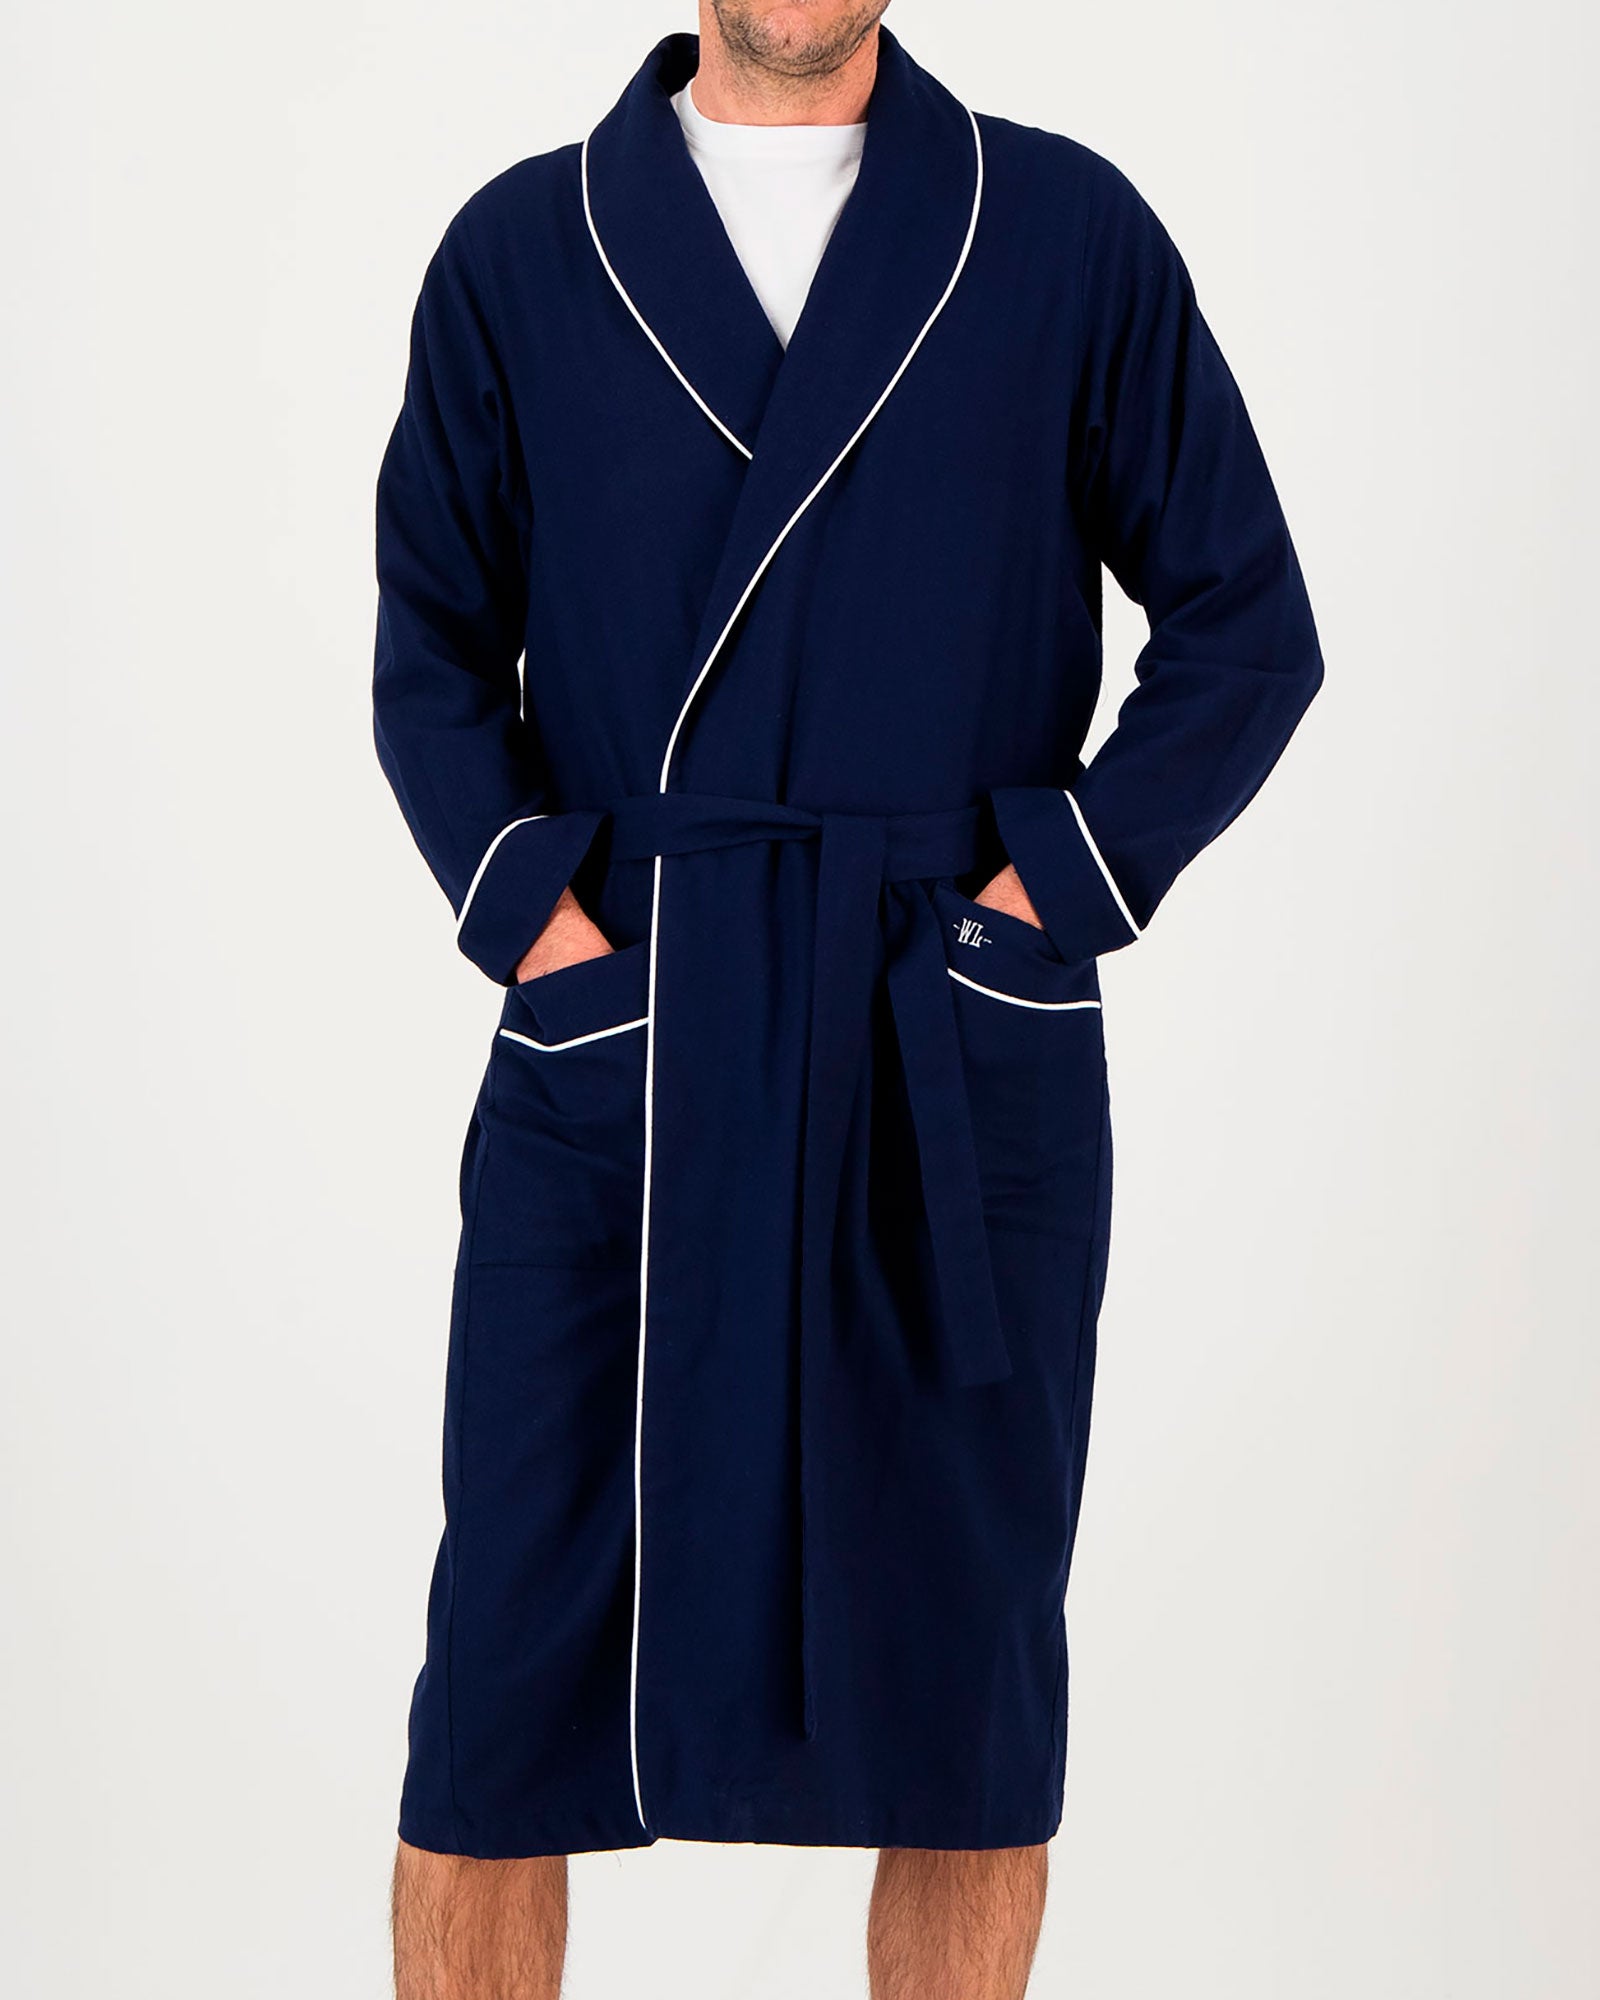 Mens Flannel Dressing Gown Navy with White Piping Front - Woodstock Laundry UK